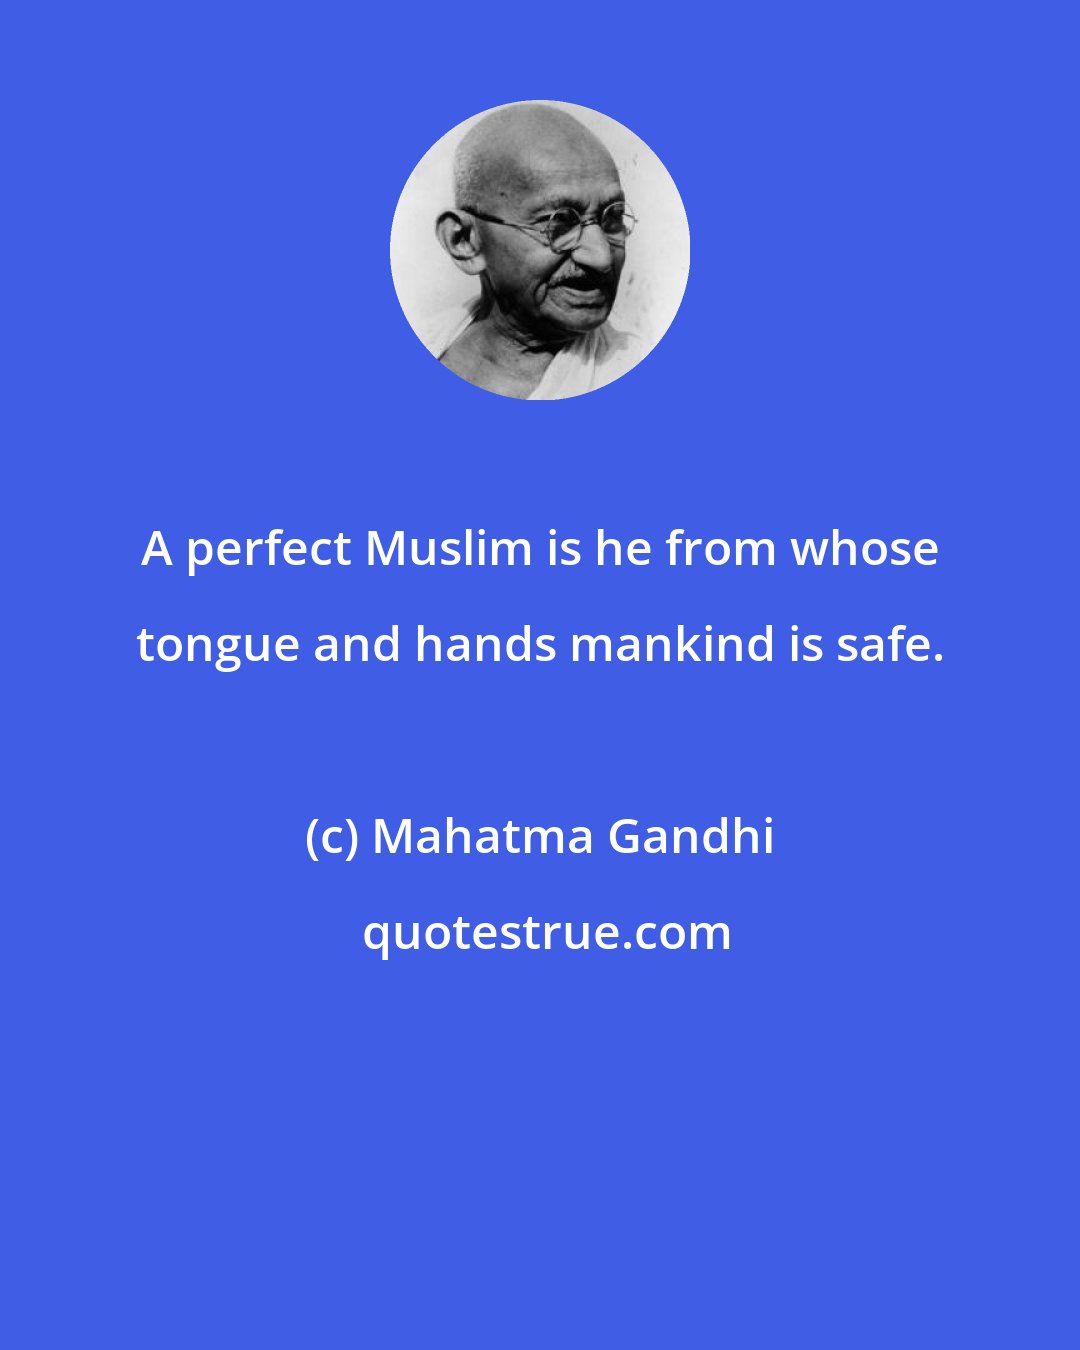 Mahatma Gandhi: A perfect Muslim is he from whose tongue and hands mankind is safe.